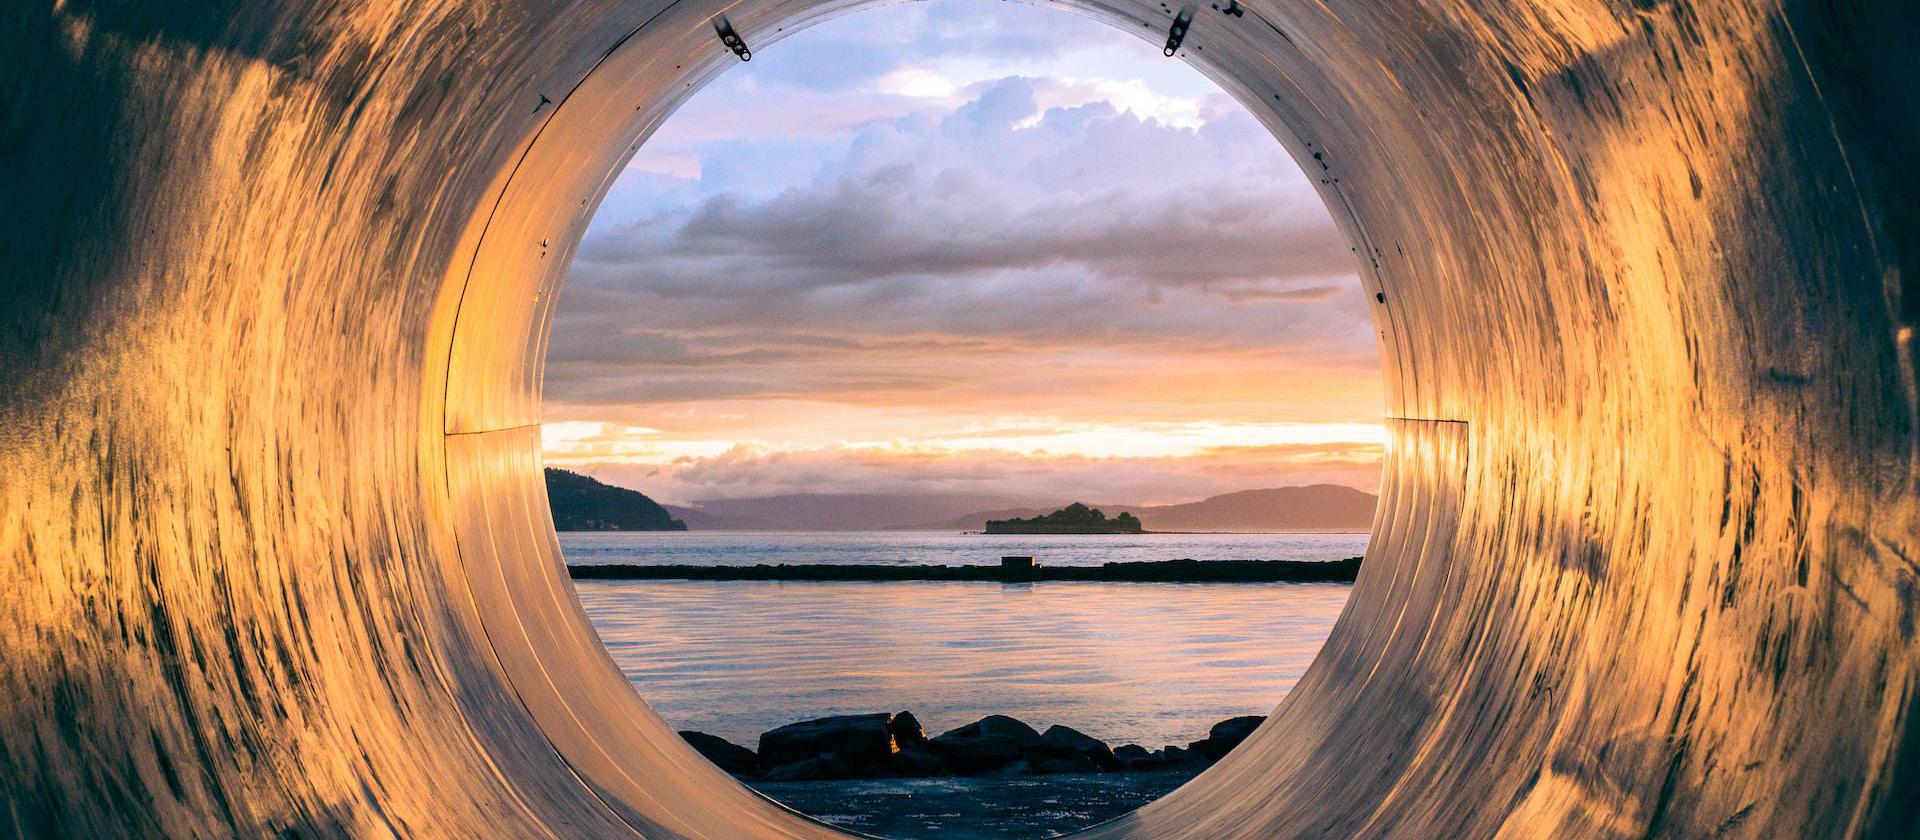 Image of body of water and sunset can be seen through the tunnel.